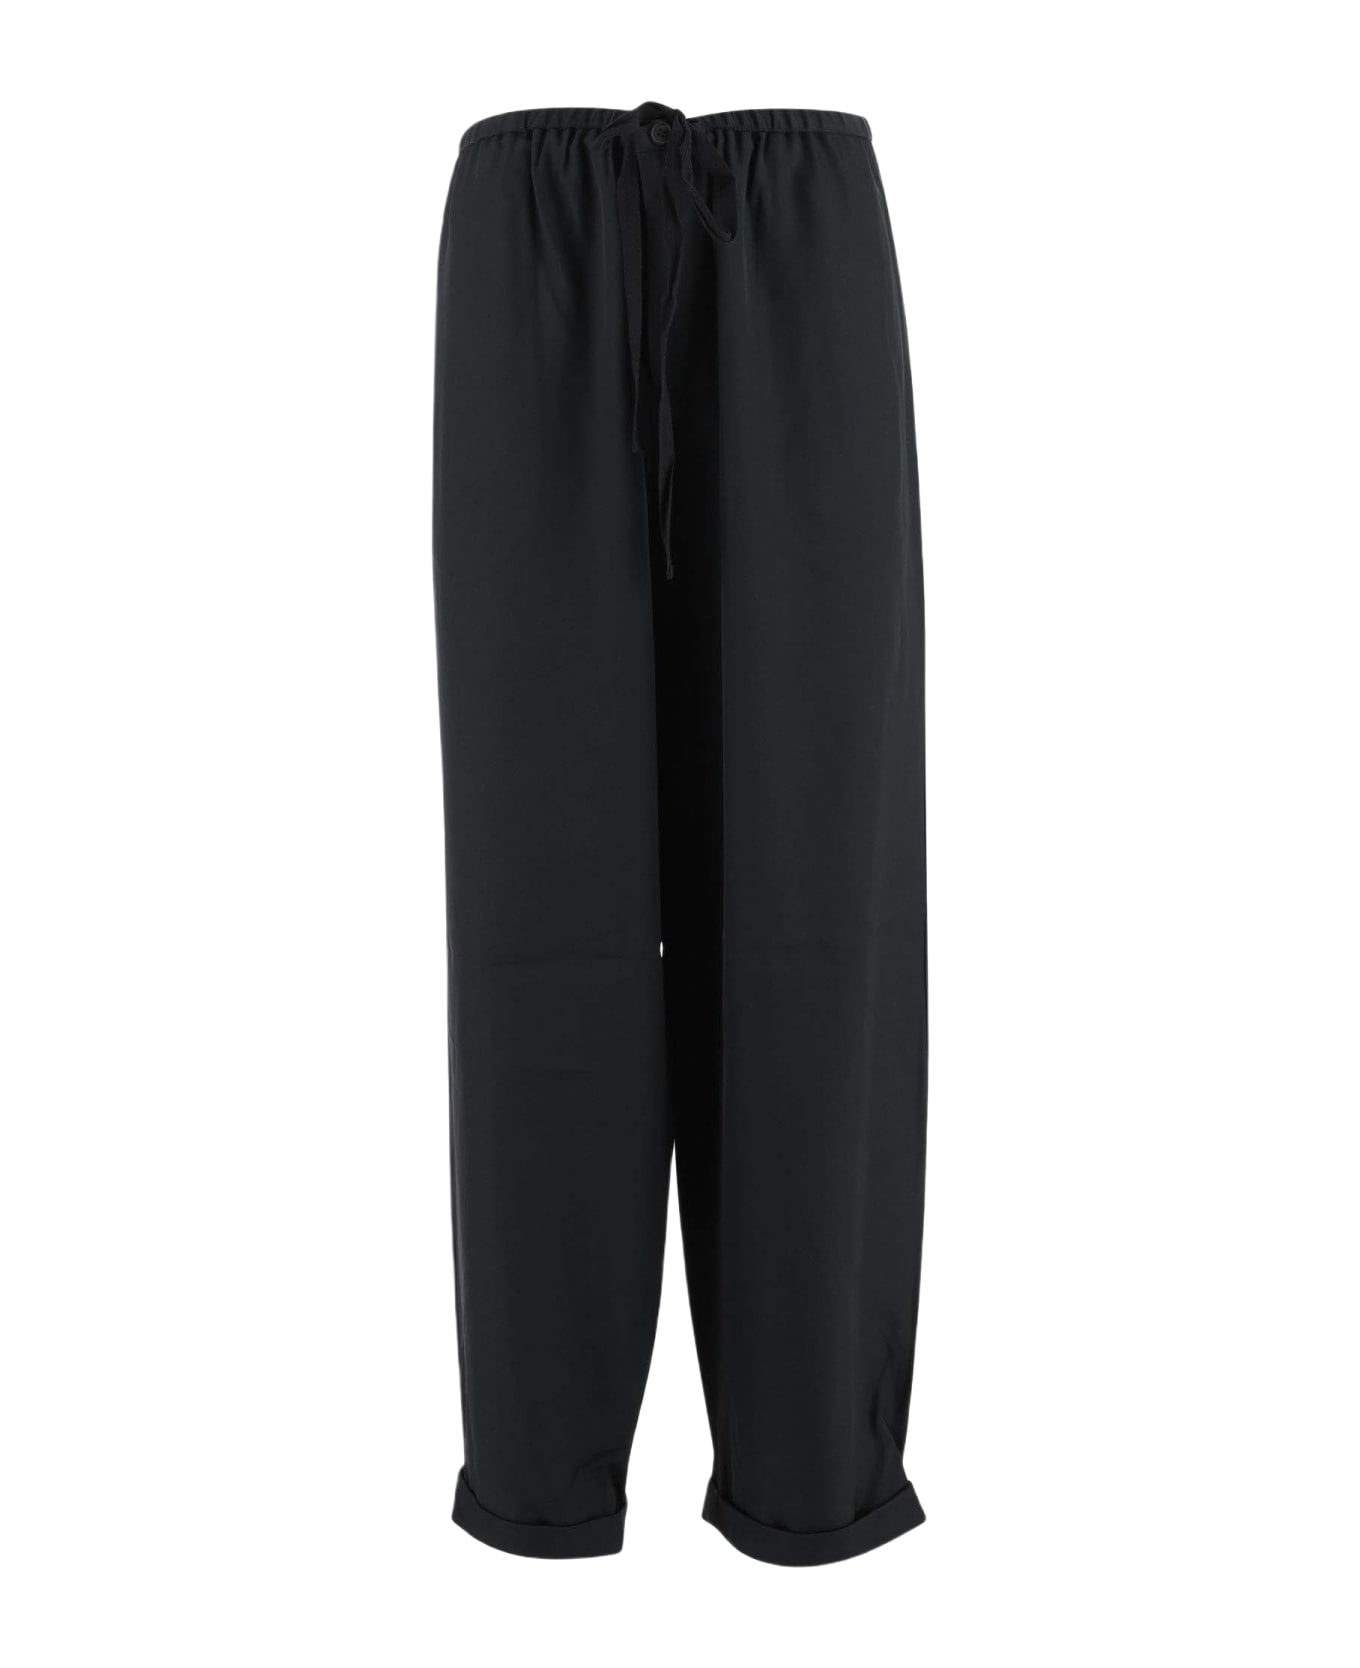 By Malene Birger Joanni Synthetic Fabric Trousers - Black